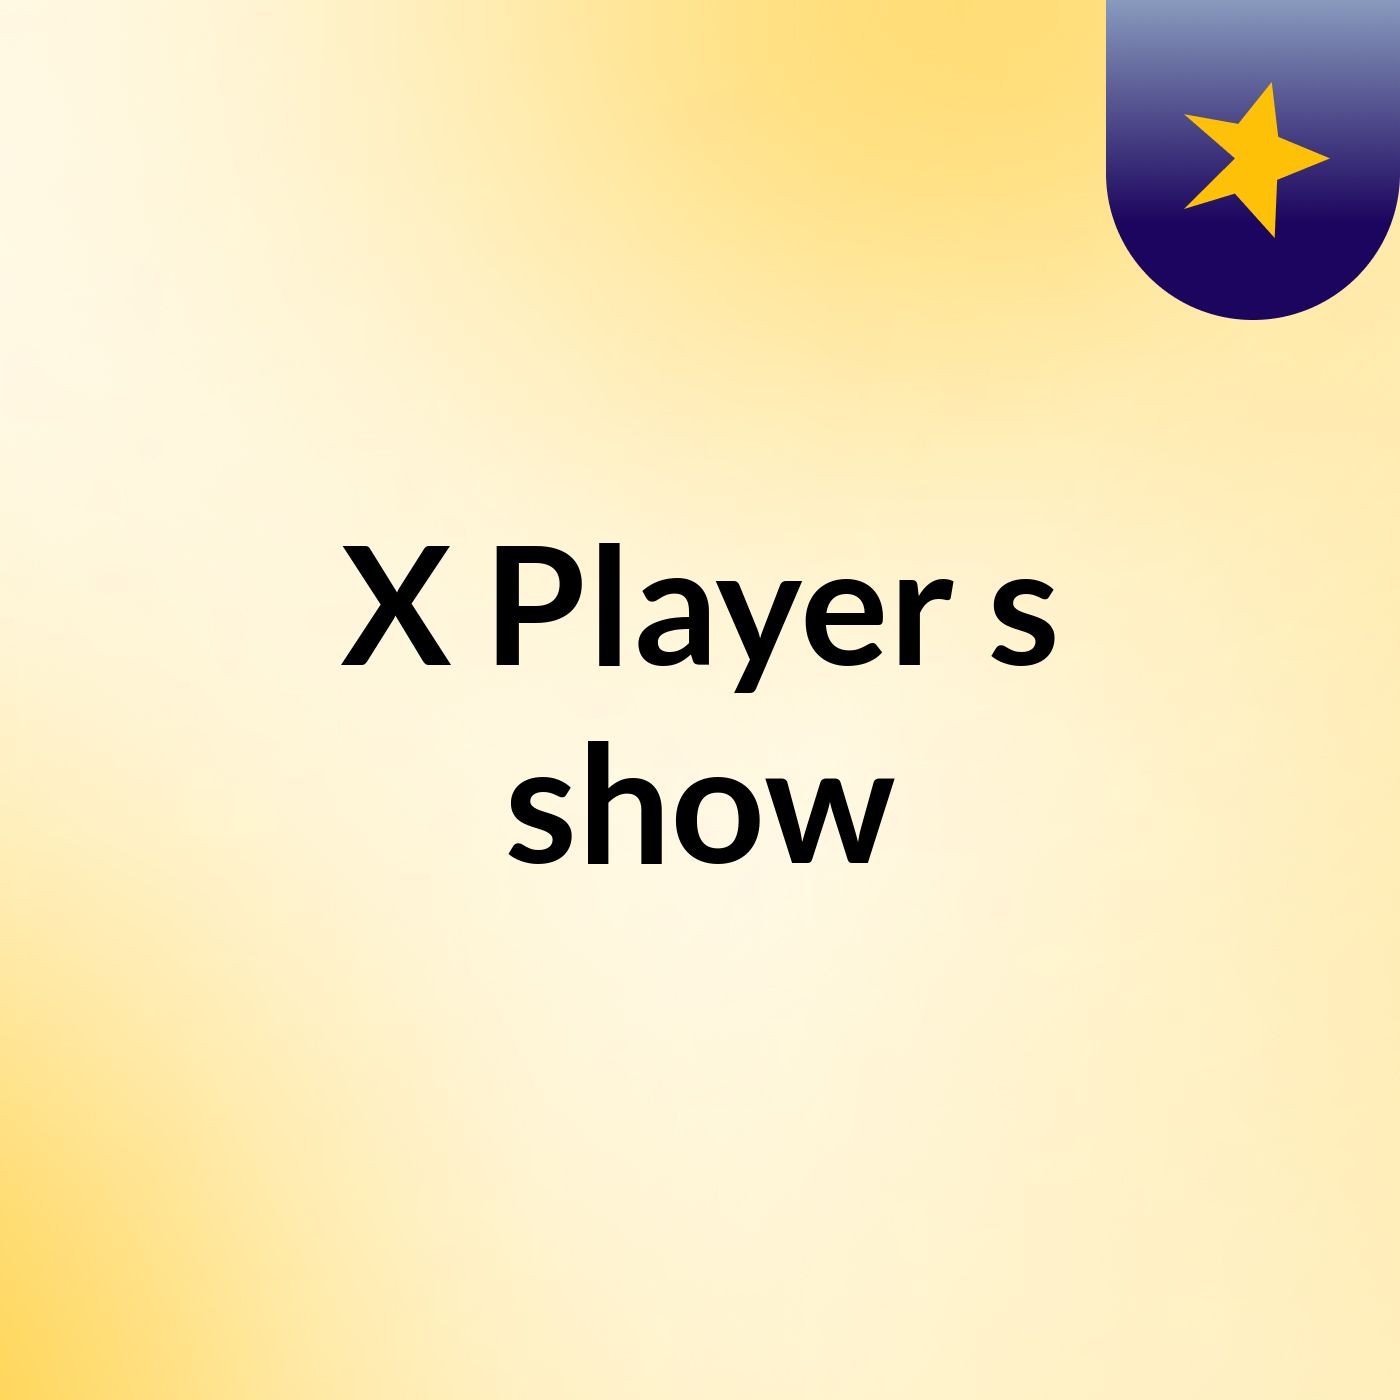 X Player's show